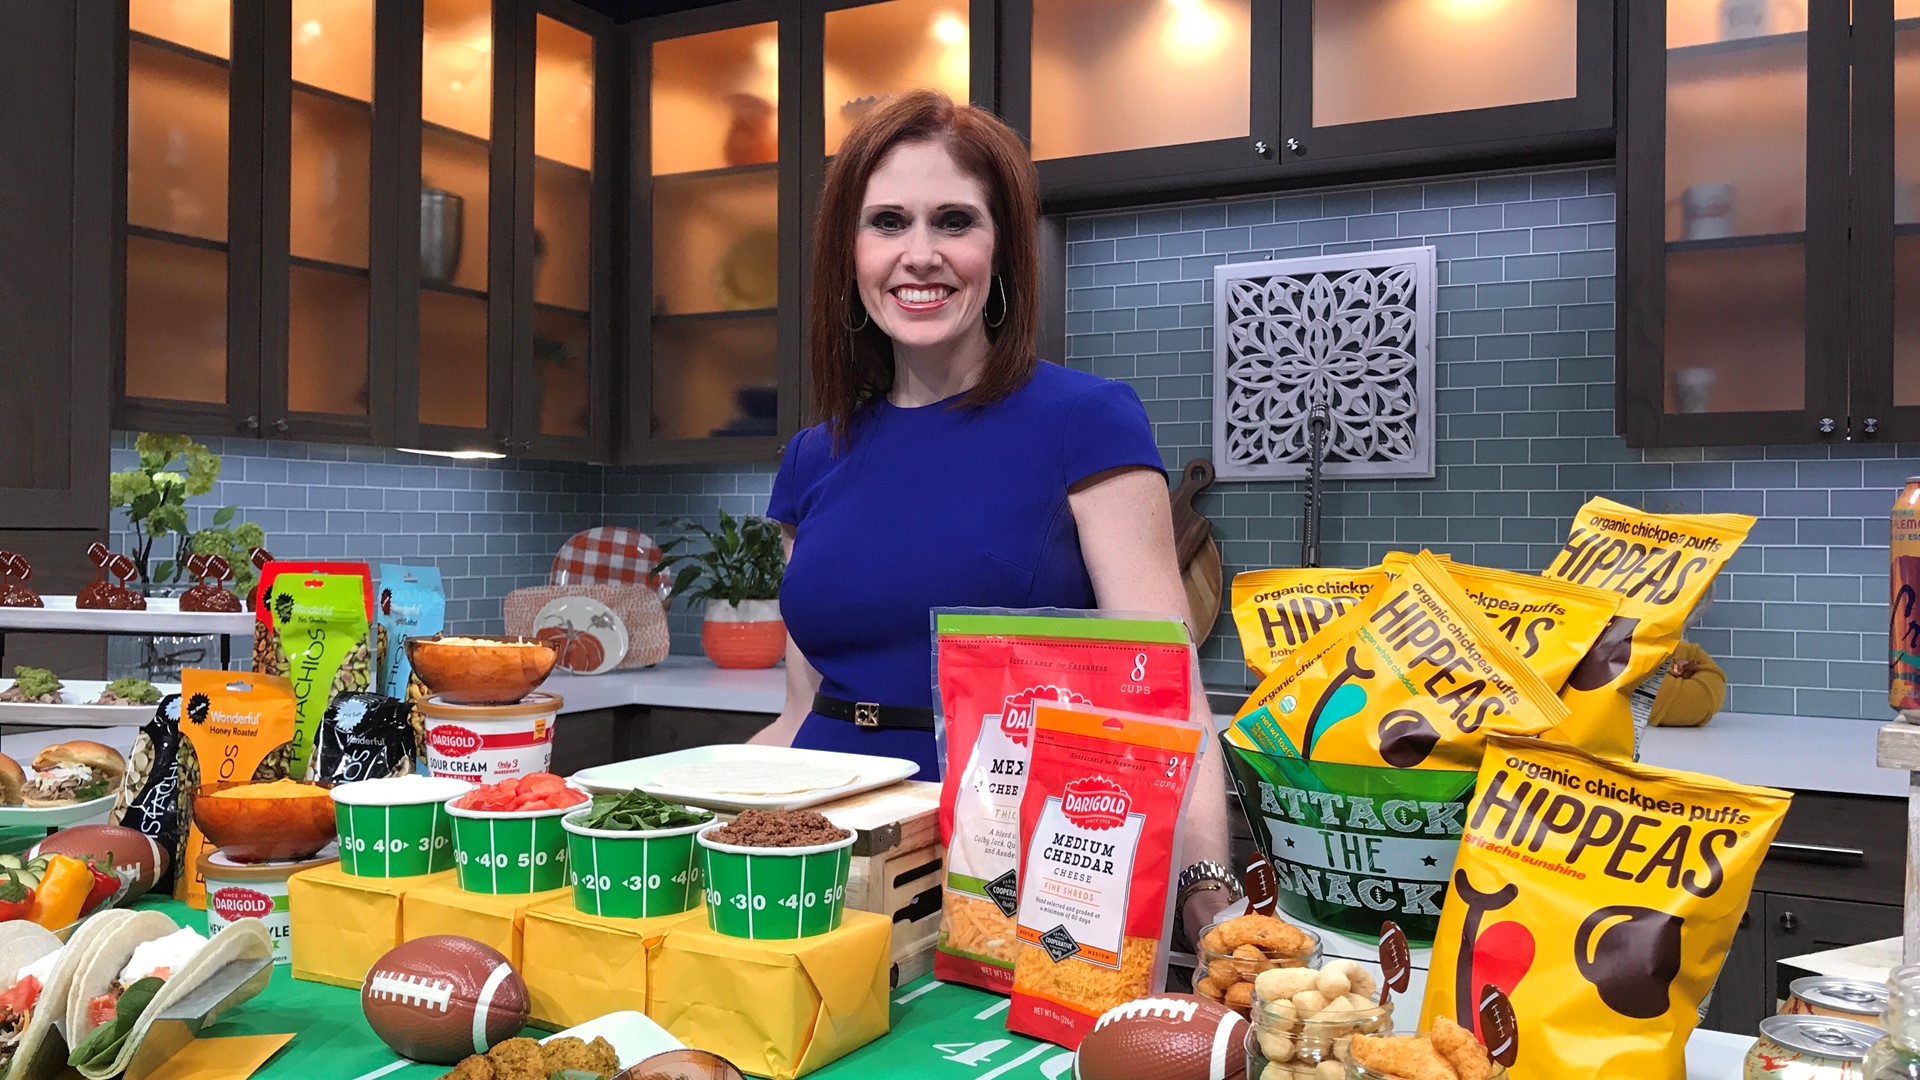 Become a fan favorite at your next tailgating party by adding these grocery picks to your shopping list. Sponsored by Parker's Plate.